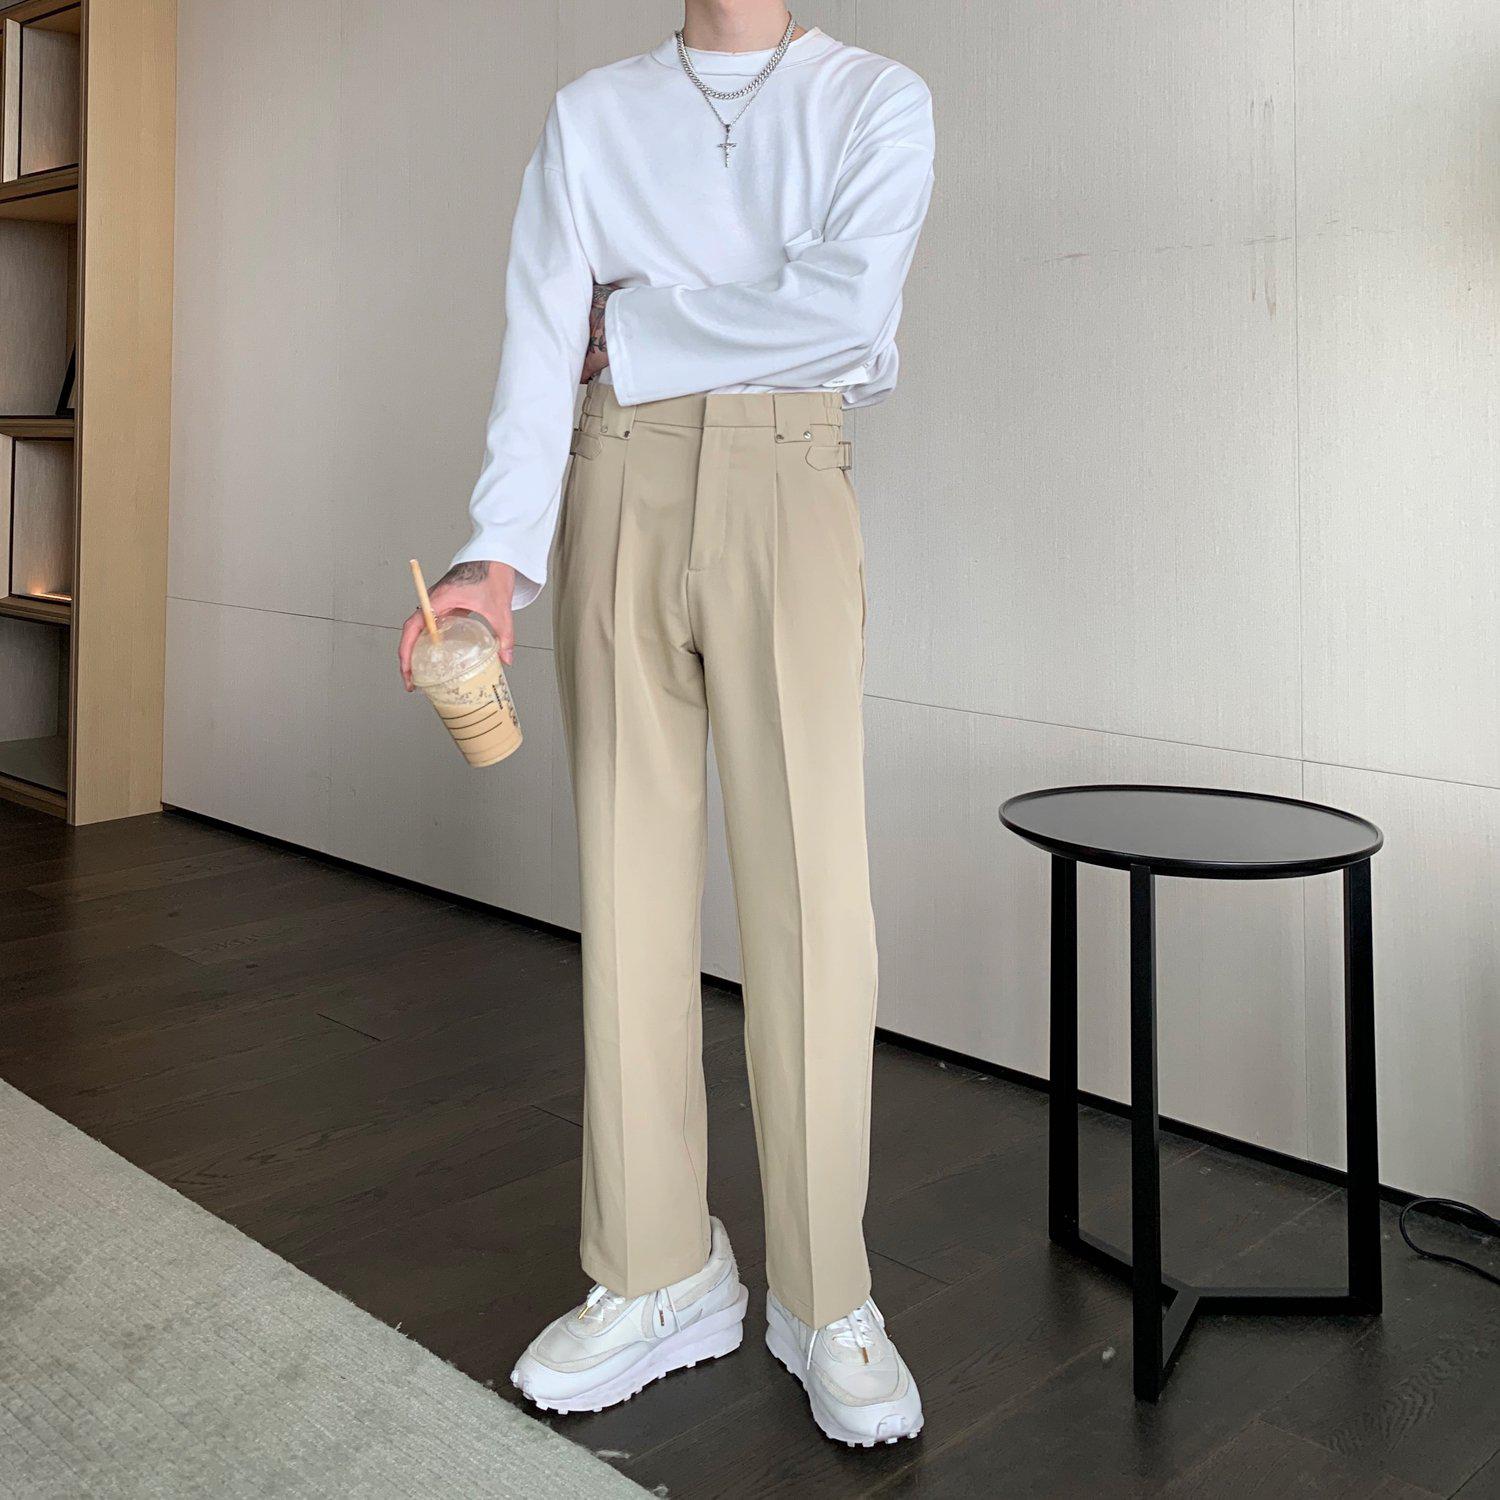 Trousers with adjustable waist - The Korean Fashion